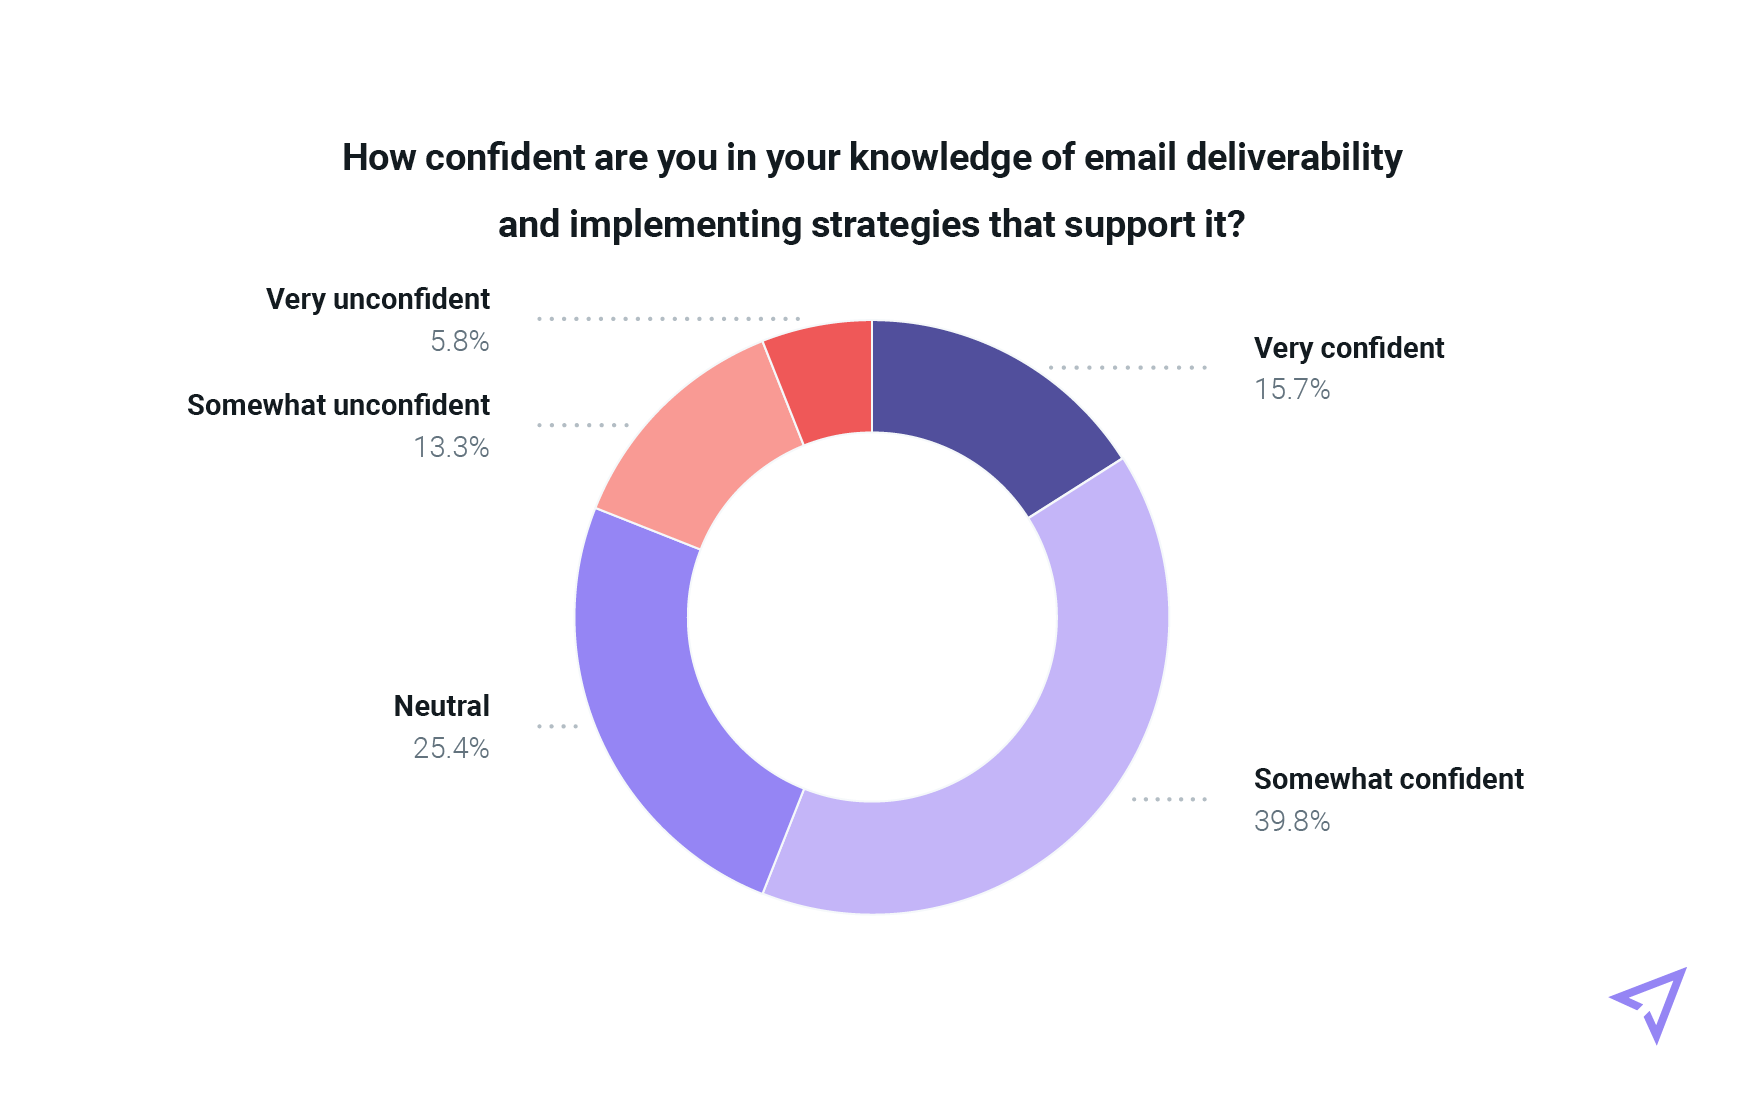 Pie chart illustrating confidence in deliverability knowledge